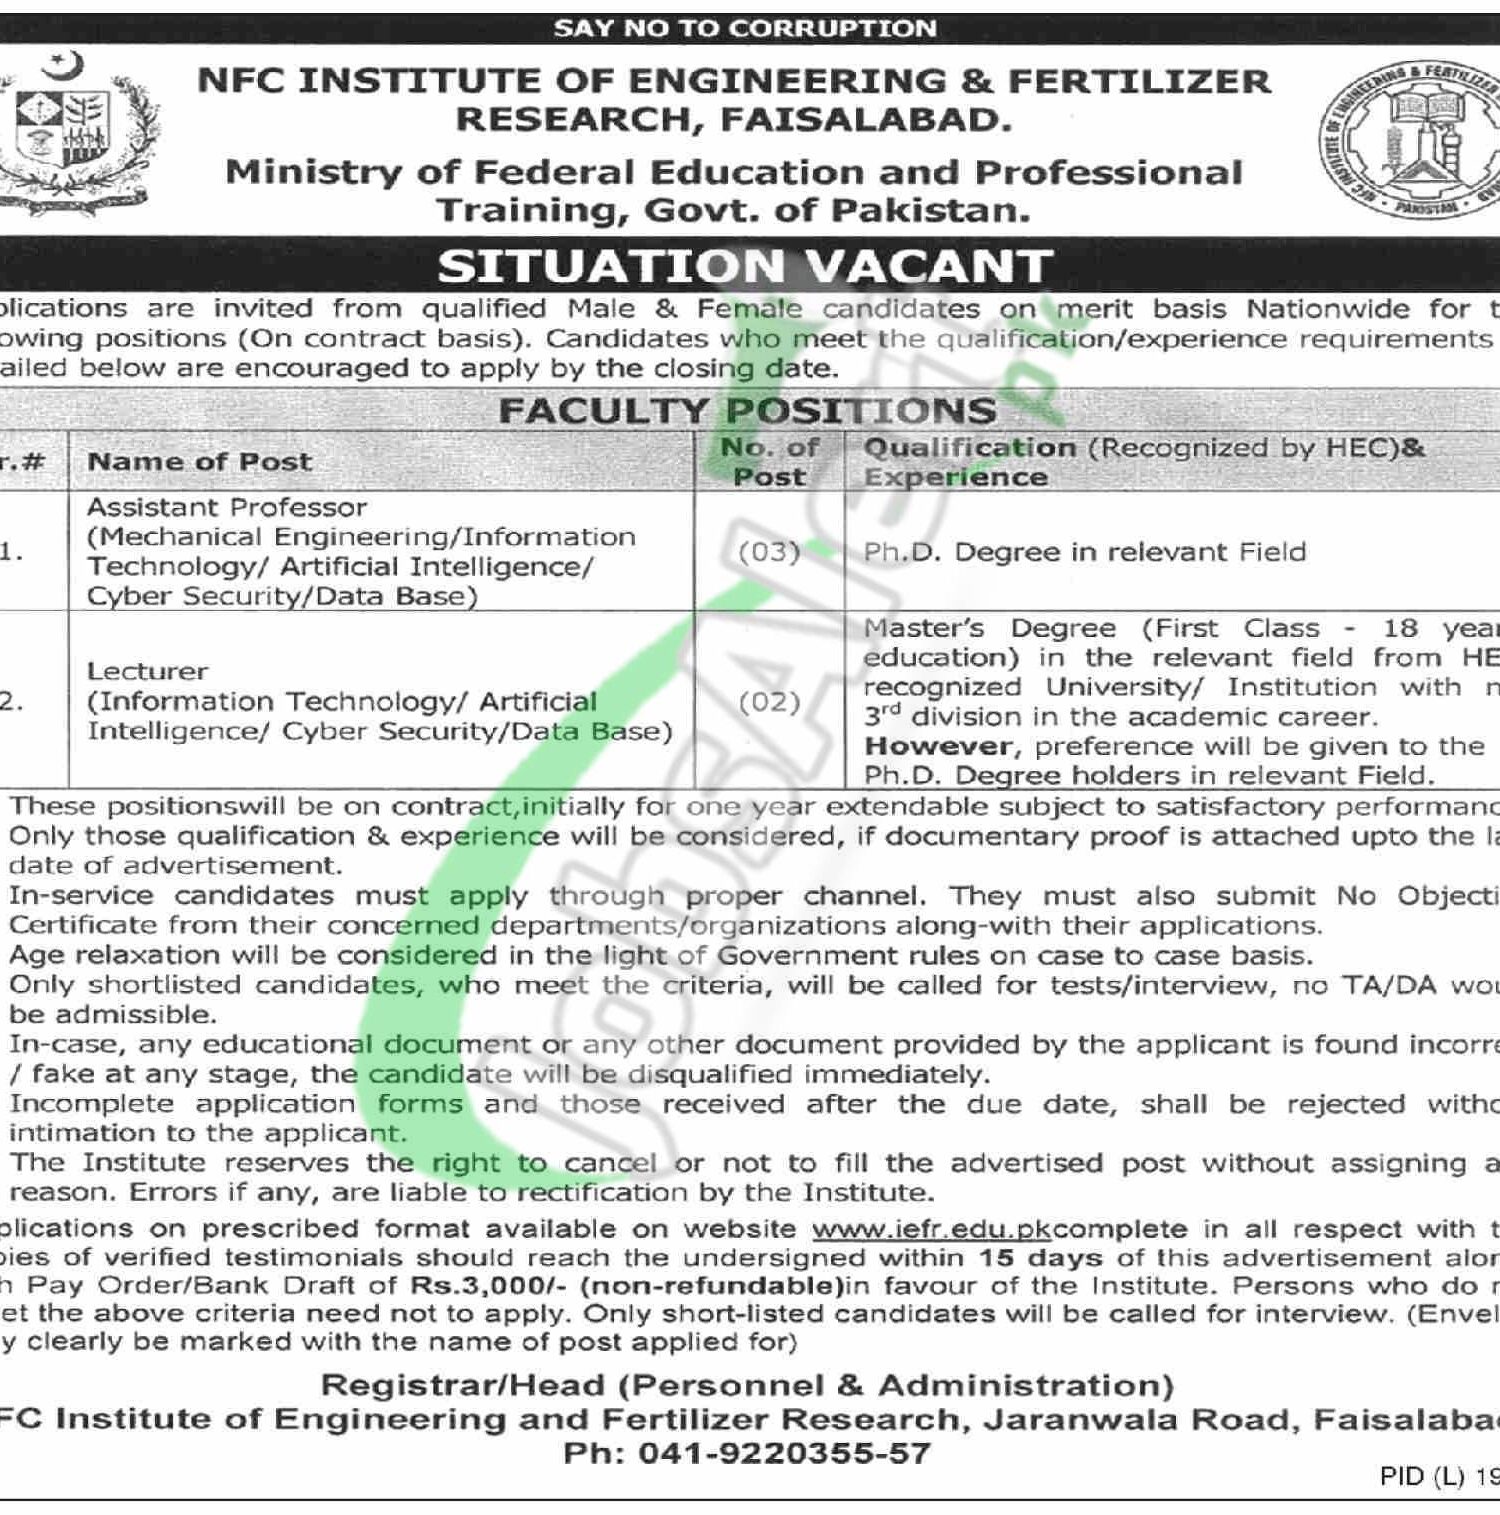 NFC Institute of Engineering and Fertilizer Research Faisalabad Jobs